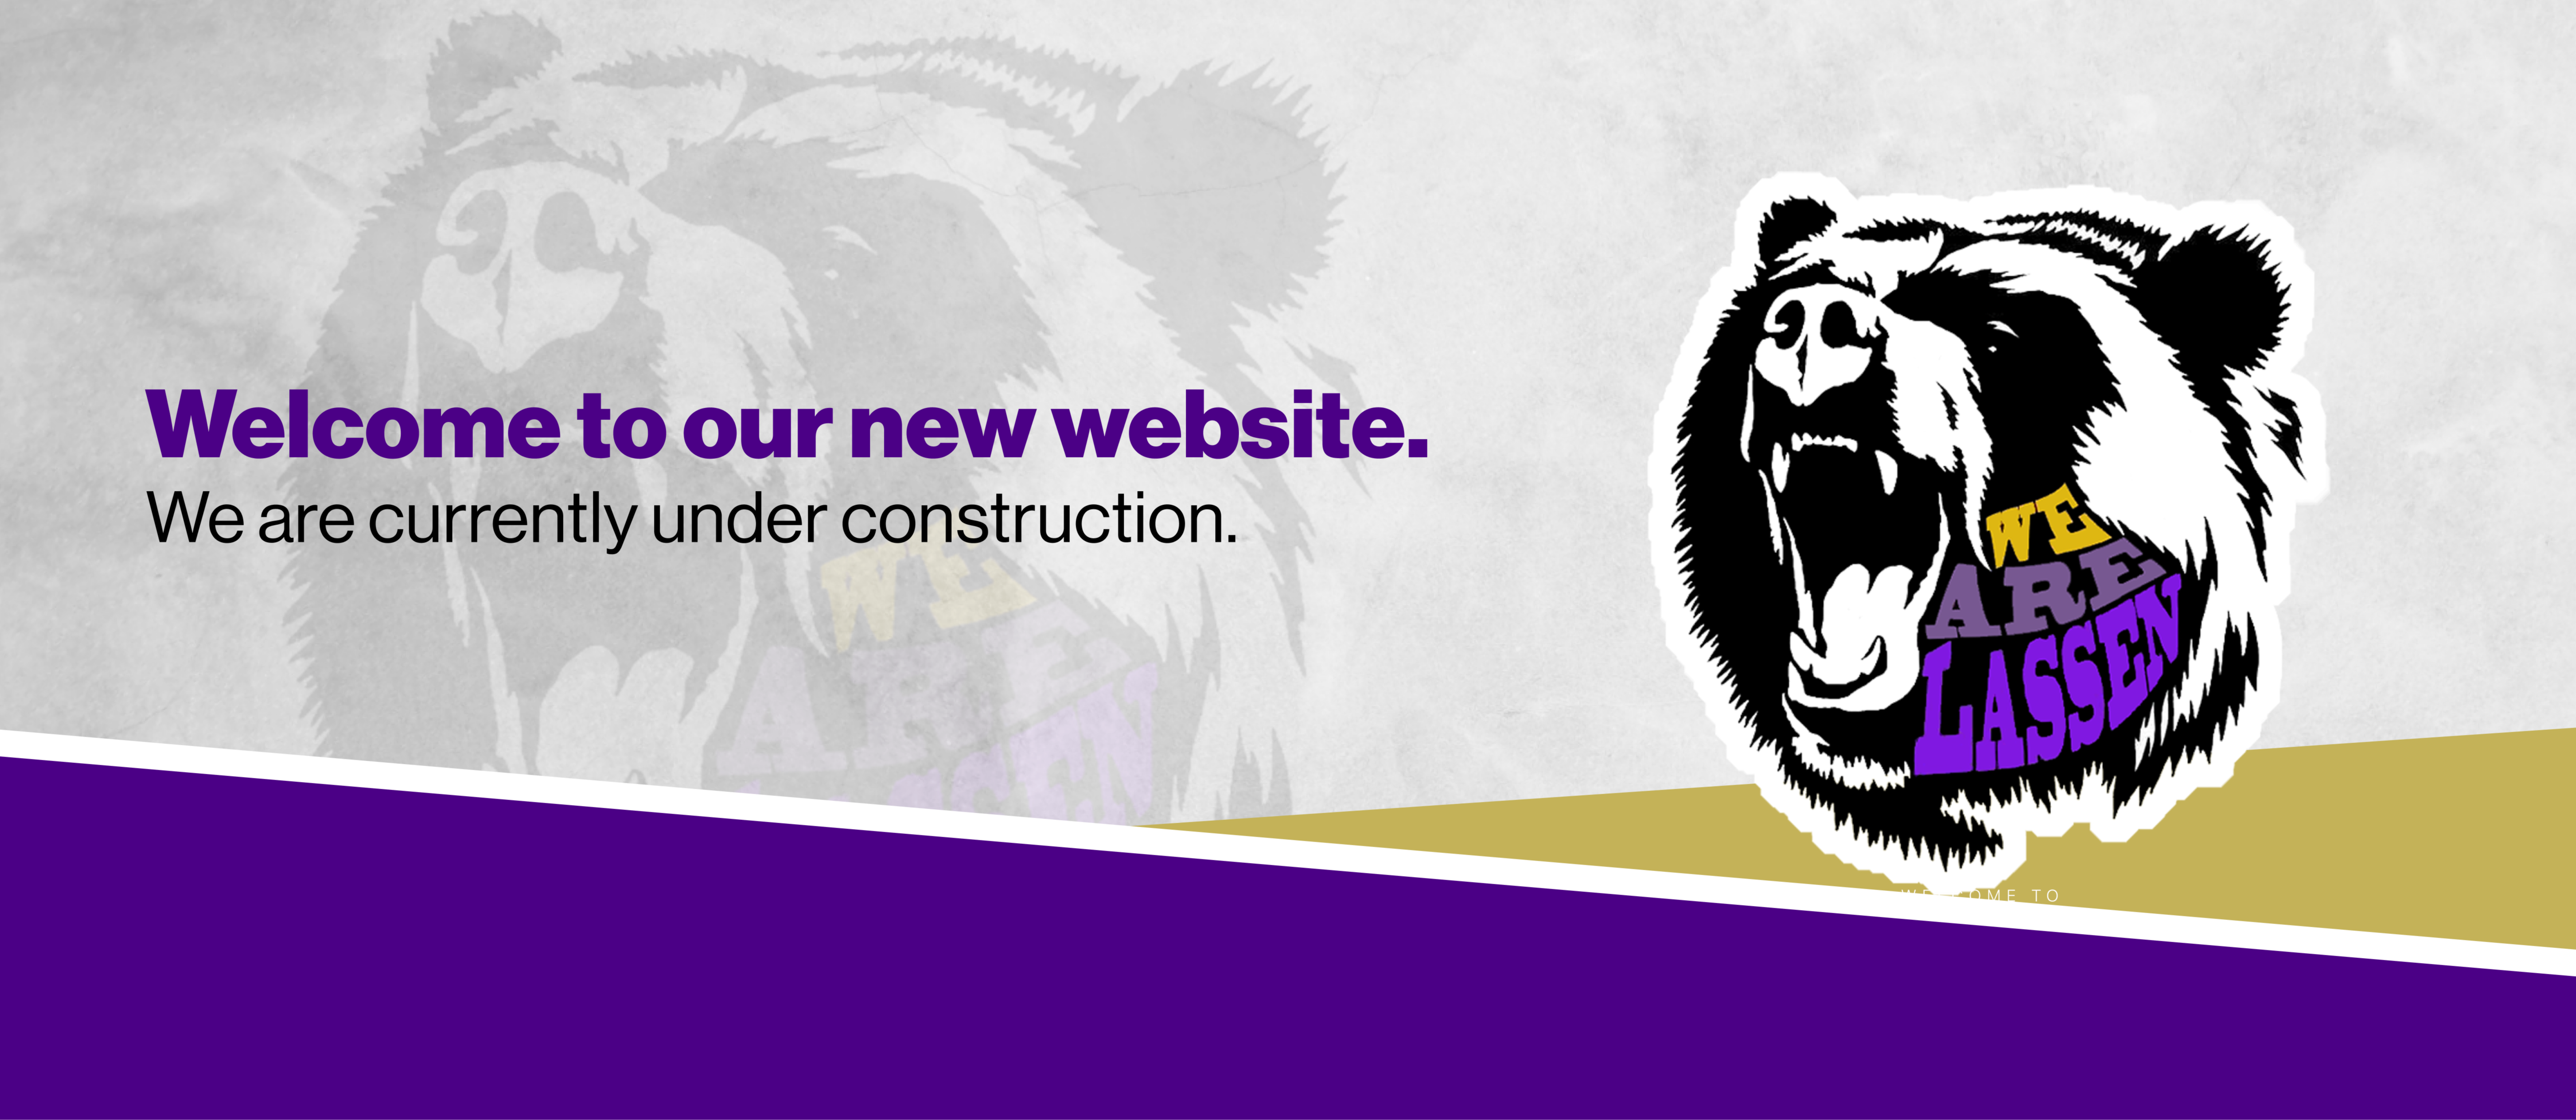 Welcome to our new website. We are currently under construction. We are Lassen Logo